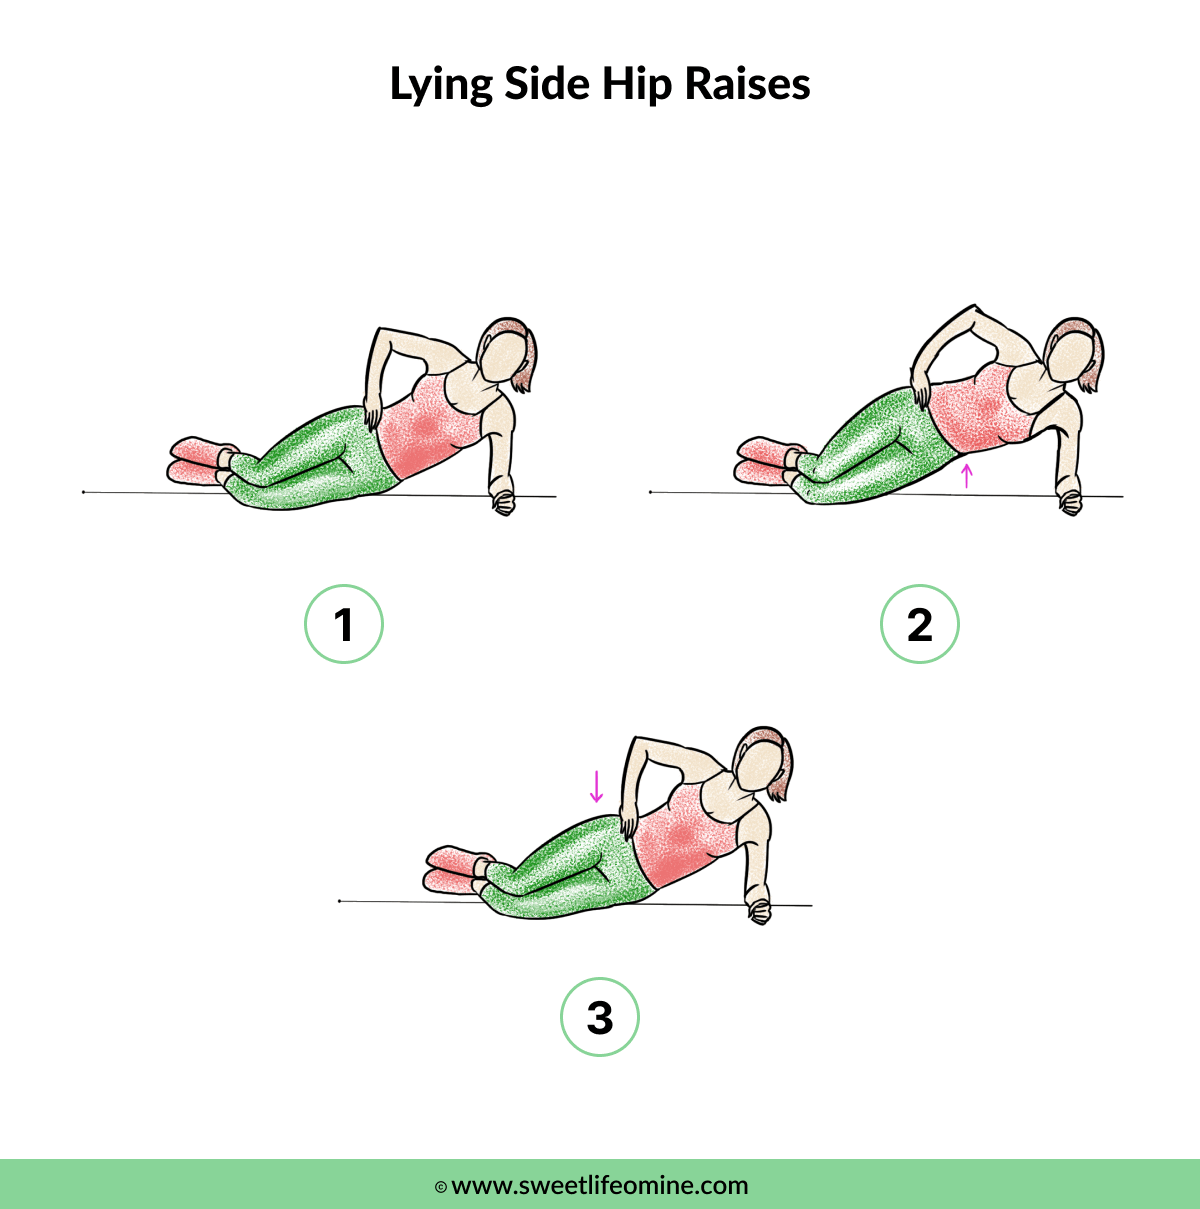 Lying Side Hip Raises - Muffin Top Exercise